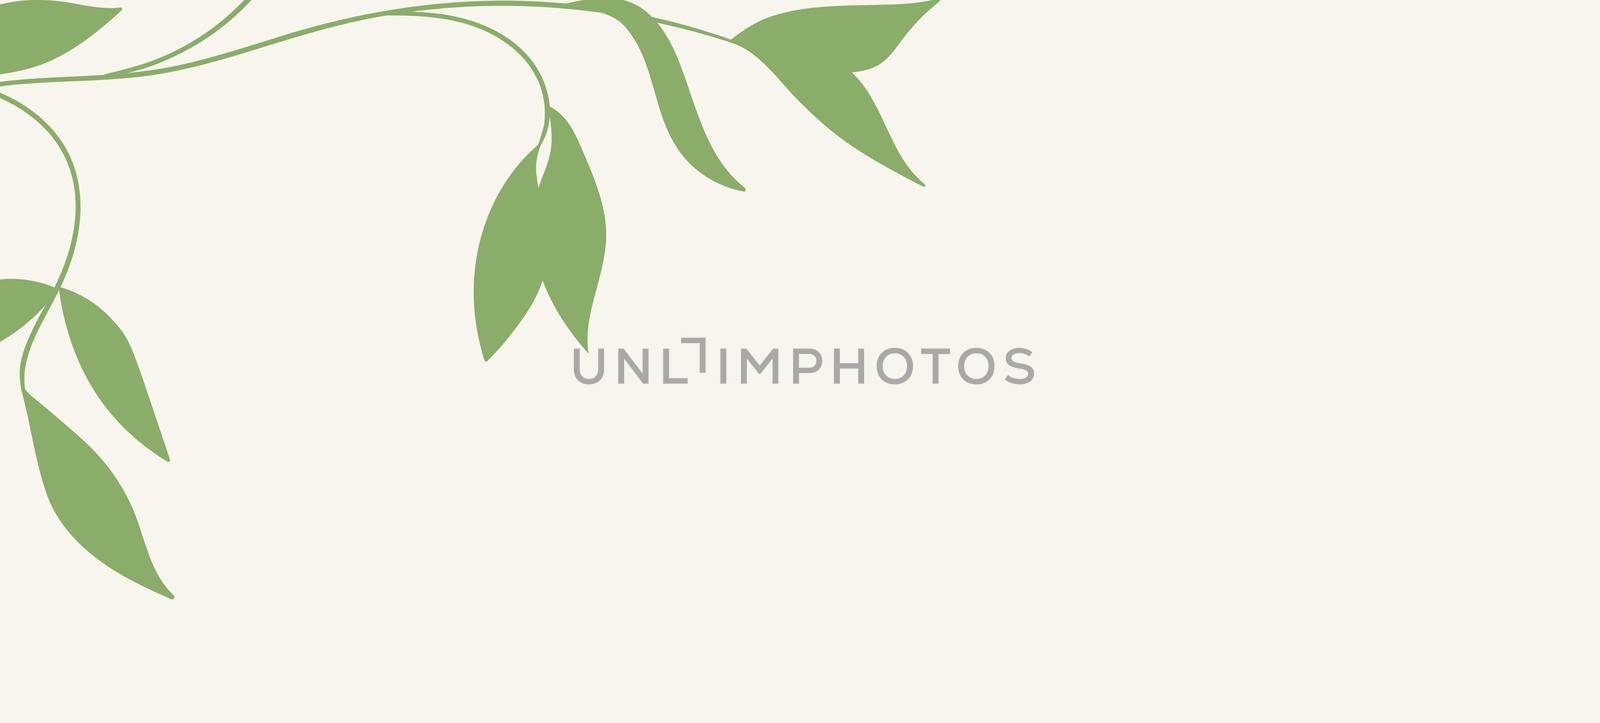 Floral web banner with drawn color exotic monstera leaves. Nature concept design. Modern floral compositions with summer branches. Vector illustration on the theme of ecology, natura, environment.